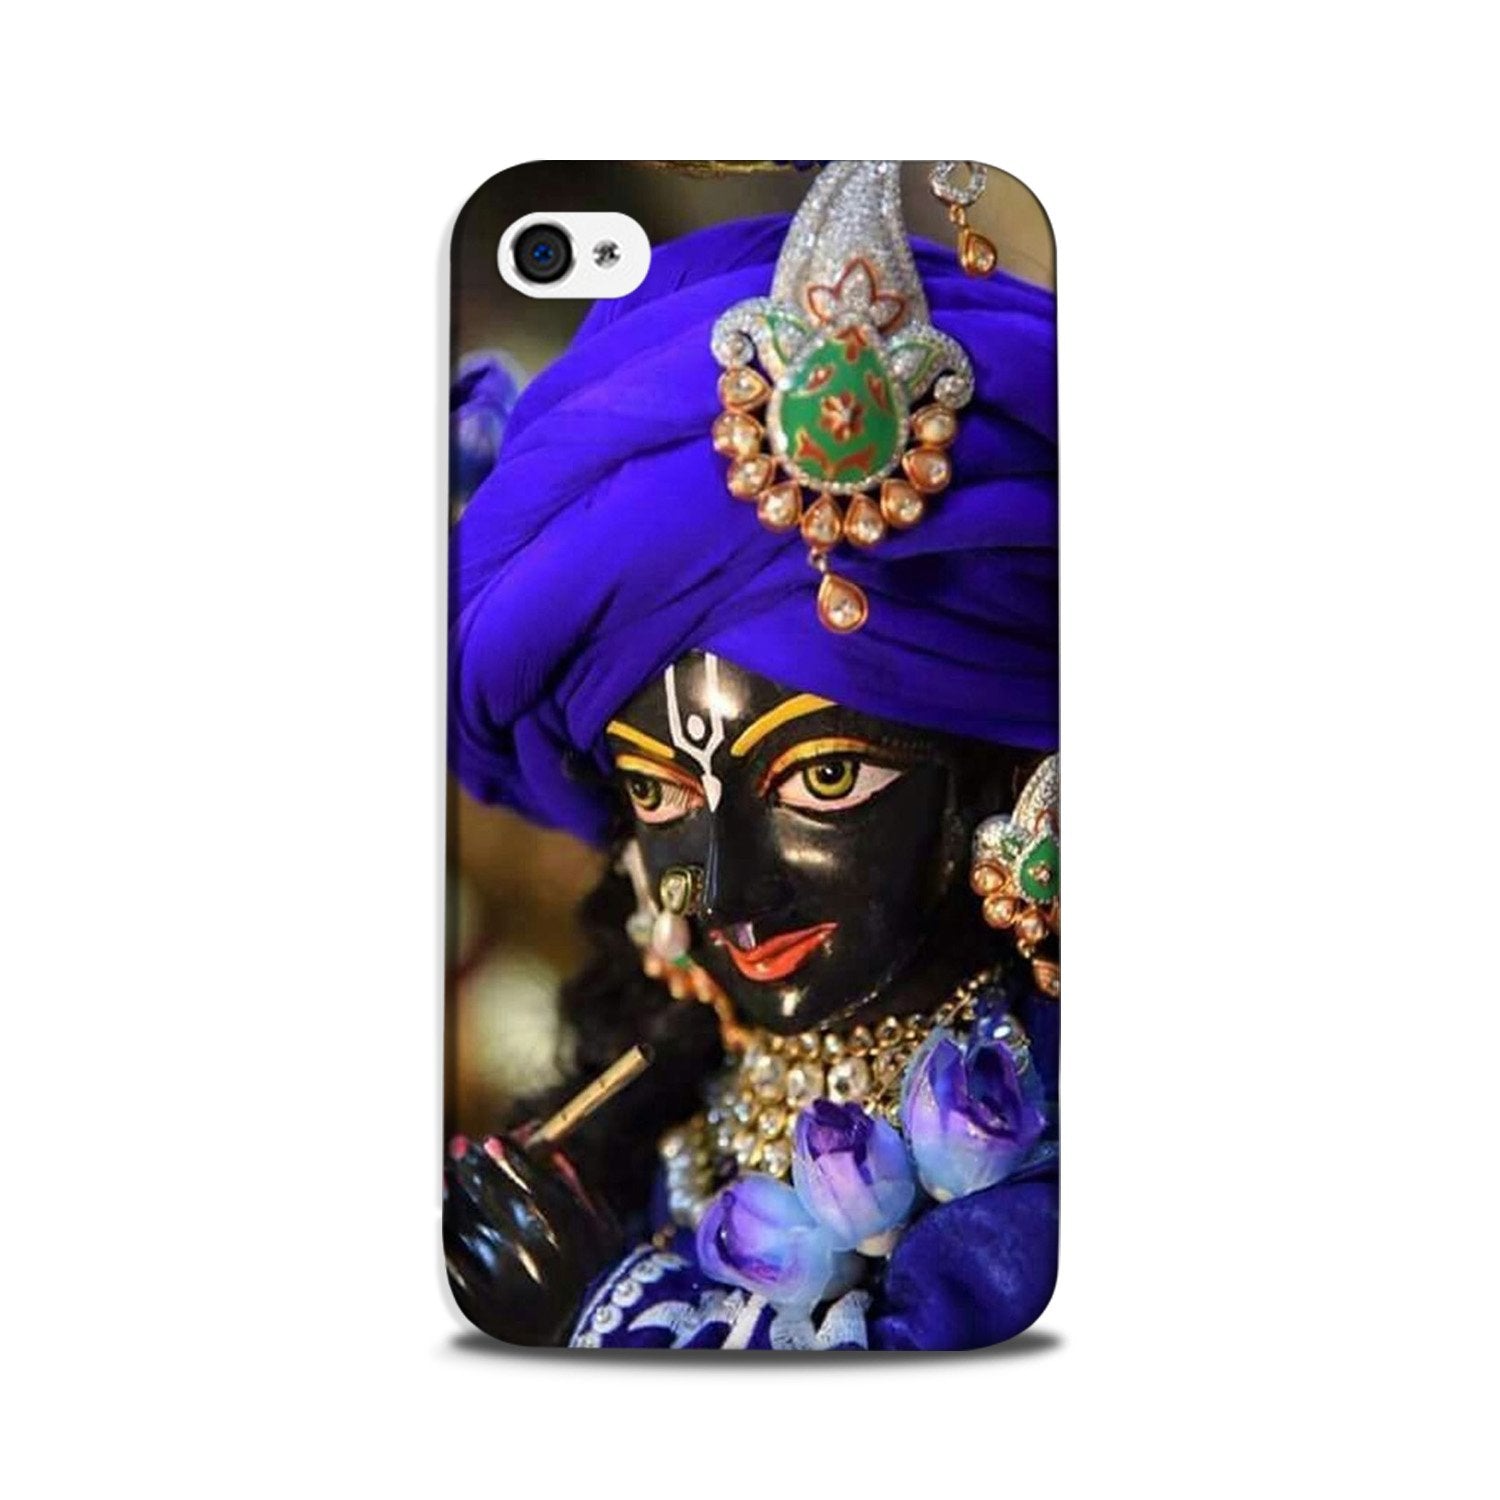 Lord Krishna4 Case for iPhone 5/ 5s